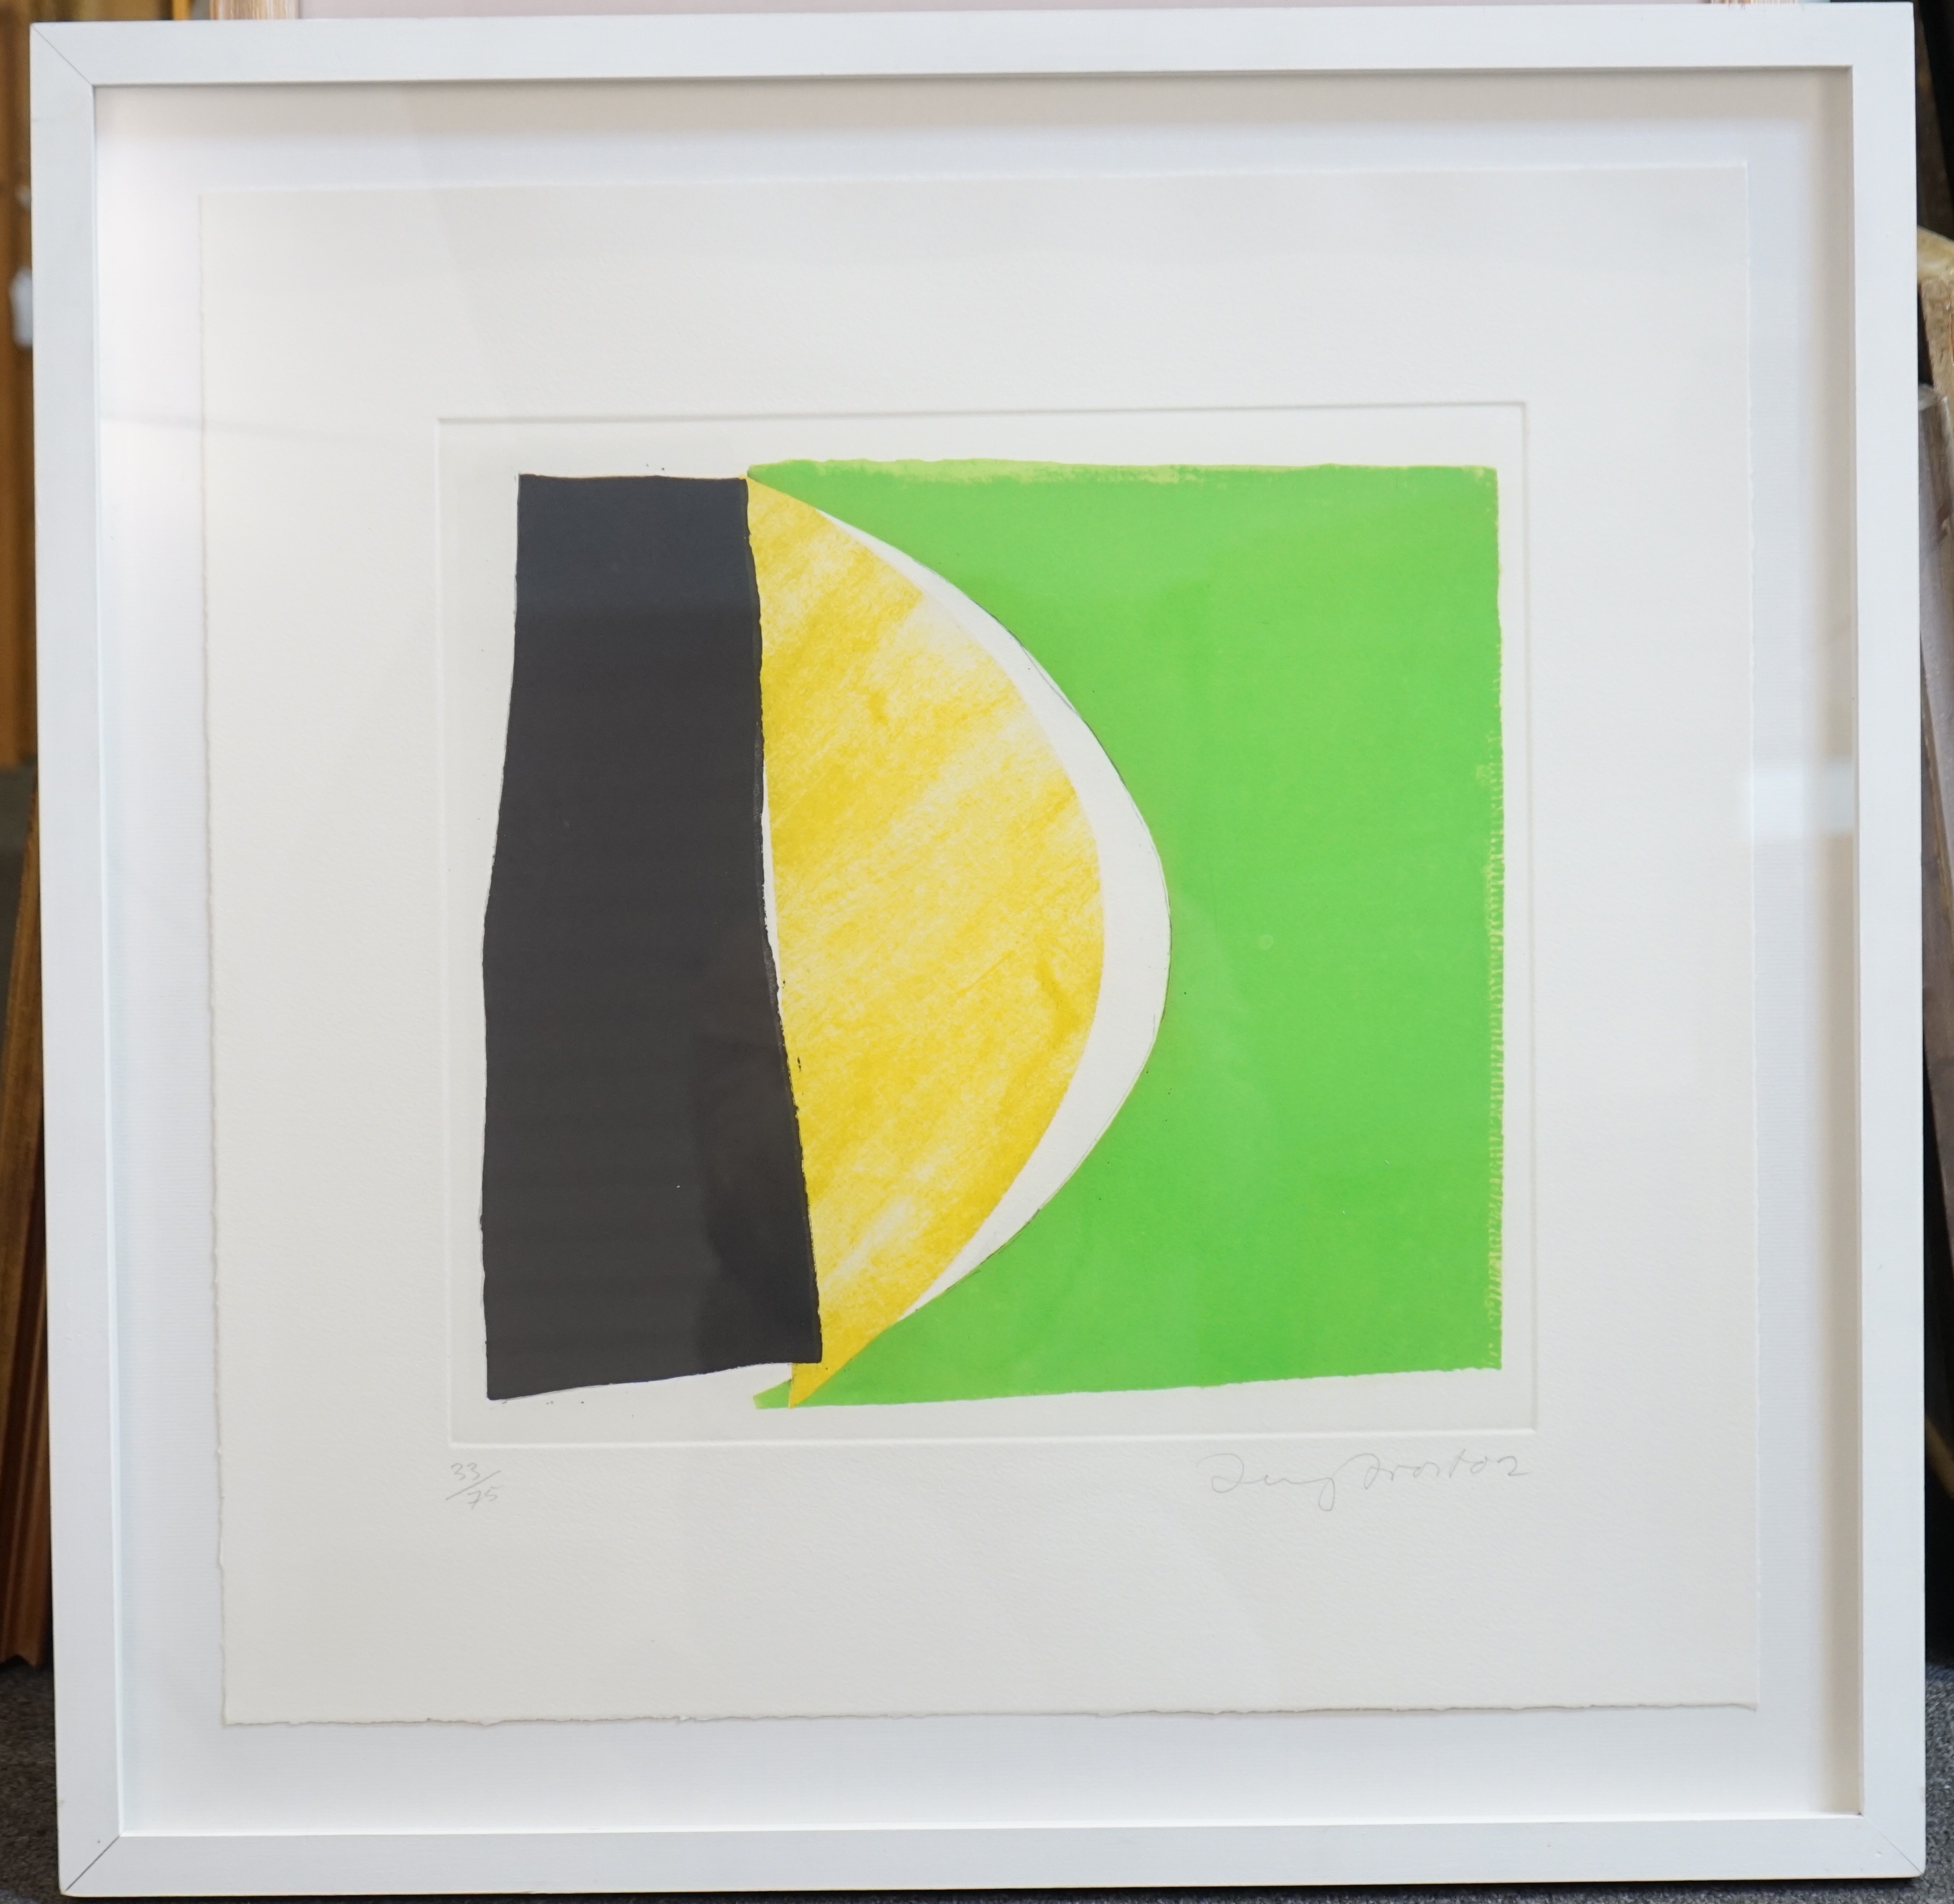 Sir Terry Frost, R.A. (1915-2003), Lemon, Green and Black, 2002, etching and aquatint on heavy wove paper, 38 x 39.5cm